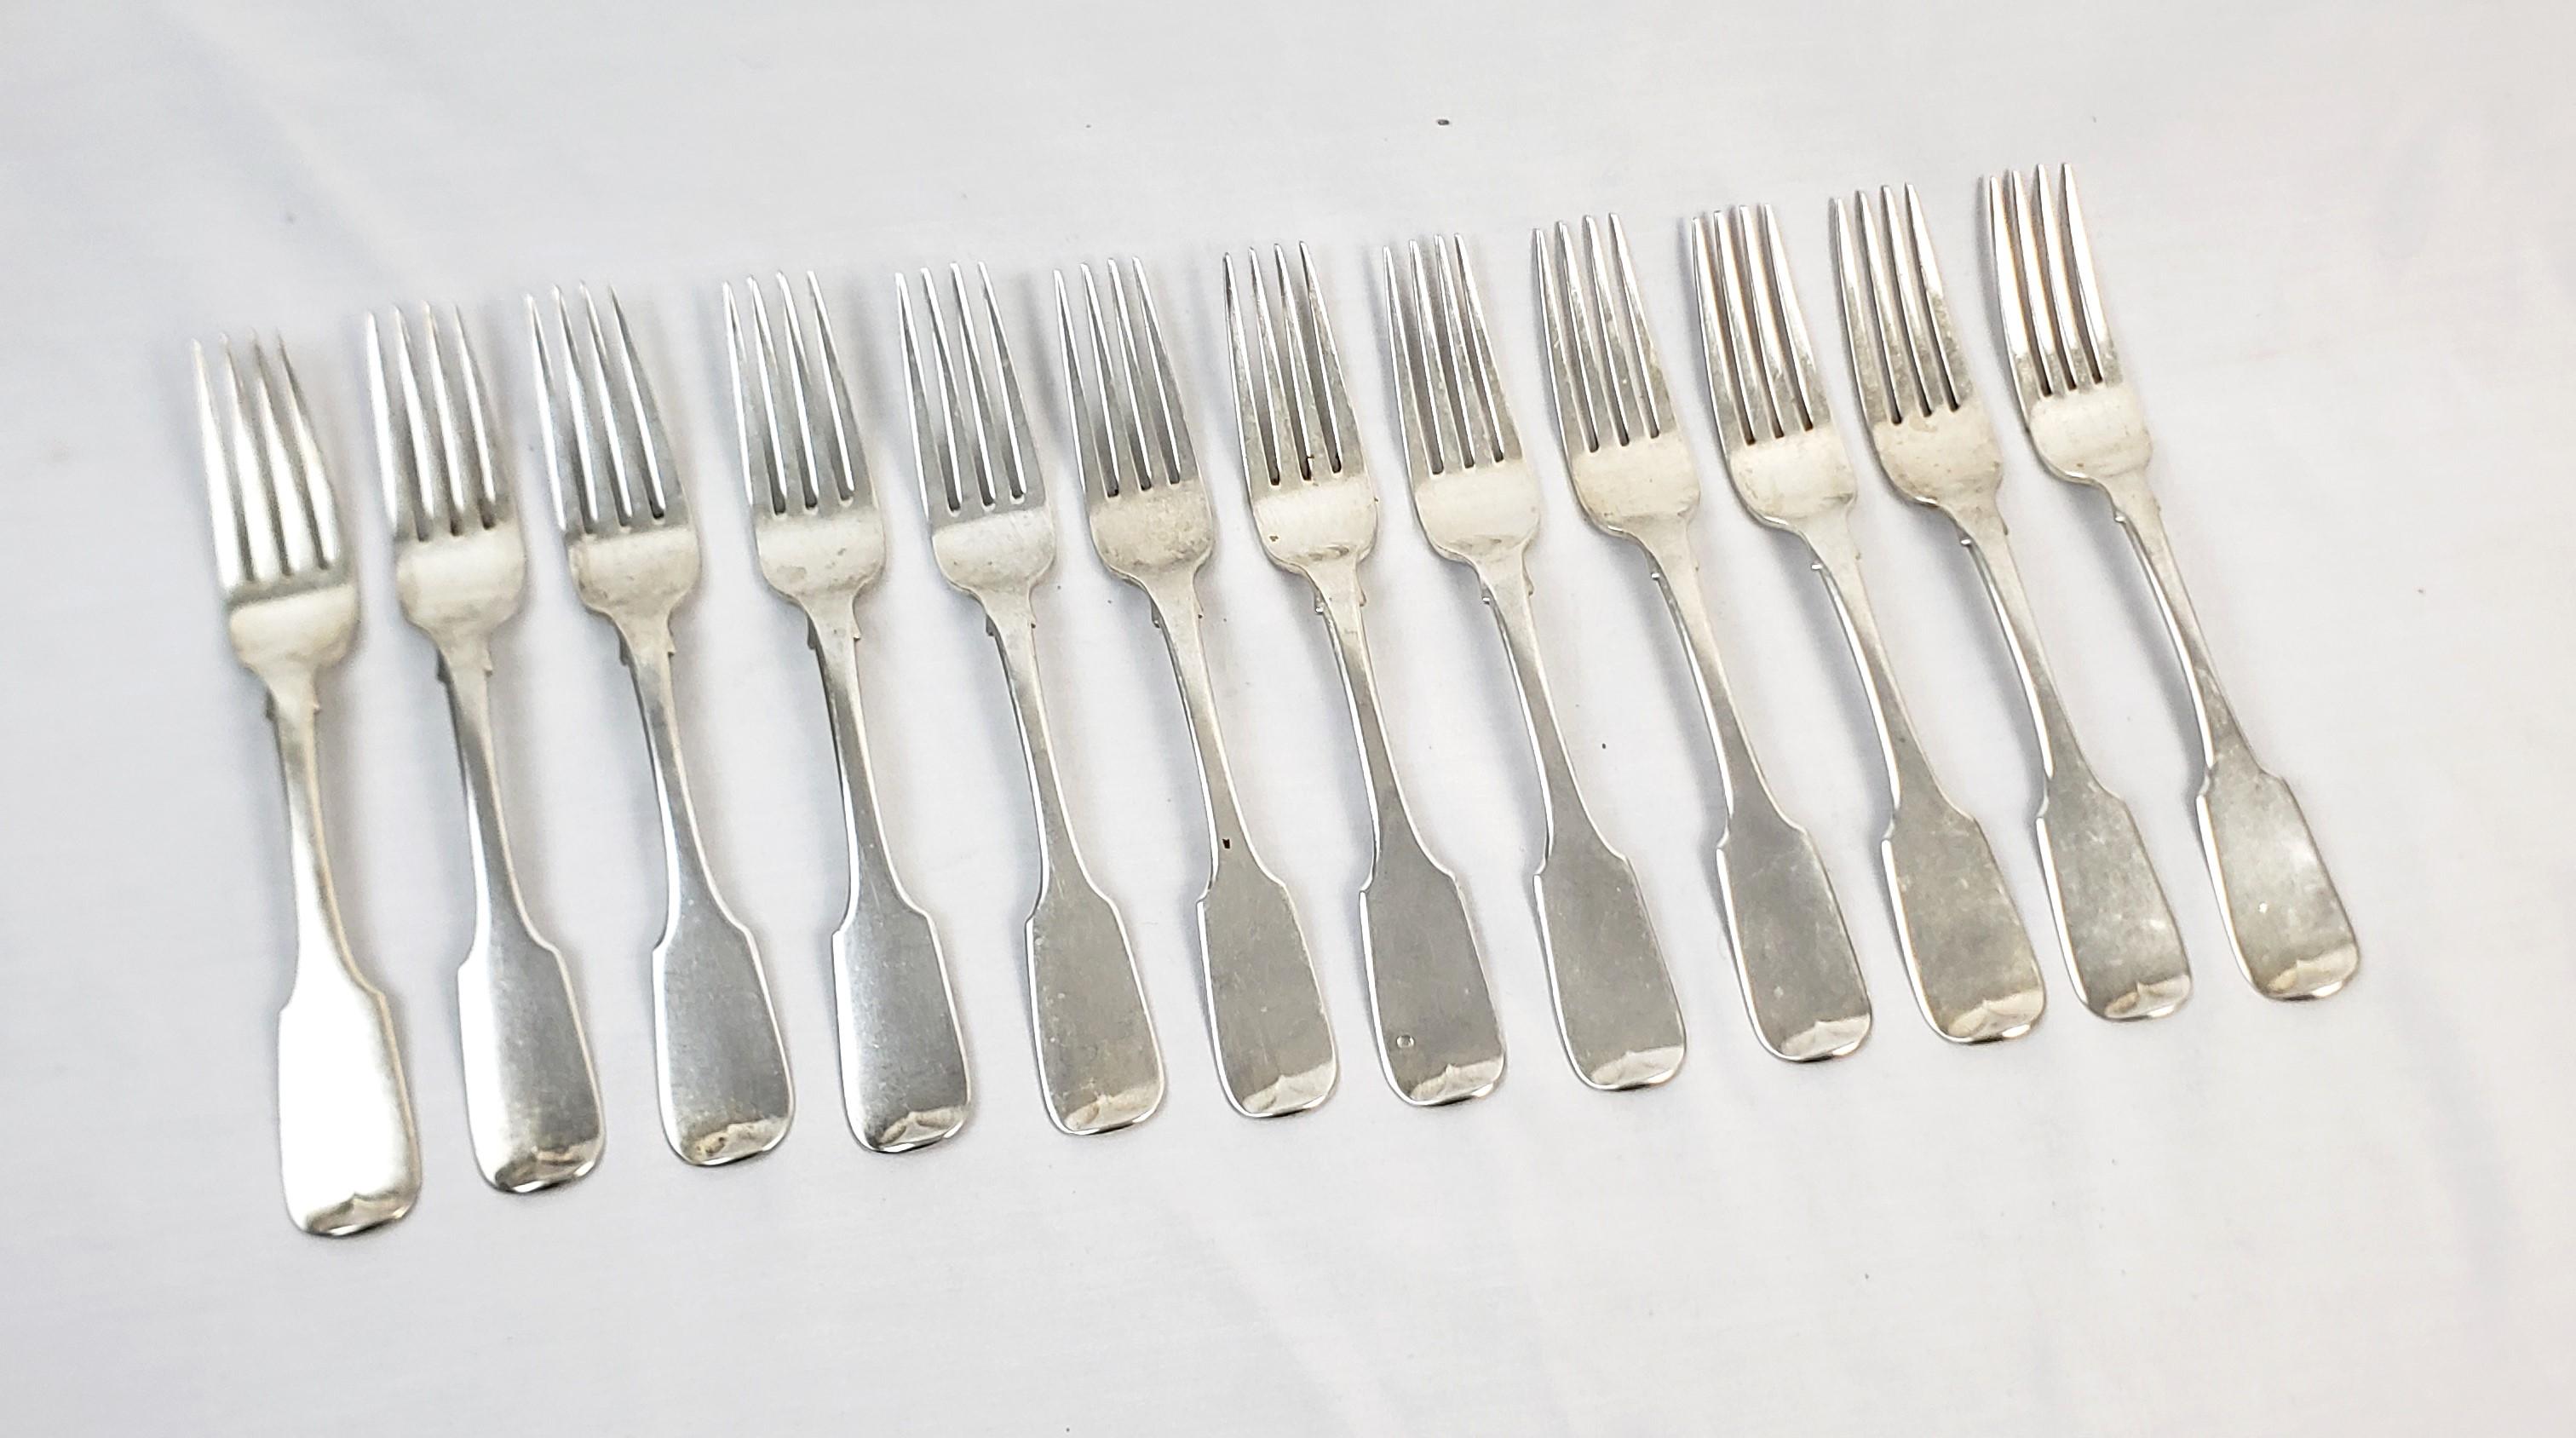 This set of twelveantique dinner forks were made by Thomas Nortzen of Ireland and date to approximately 1830 and done in the period George IV style. These large and heavy forks are composed of sterling silver with a simple rippled accent on the base